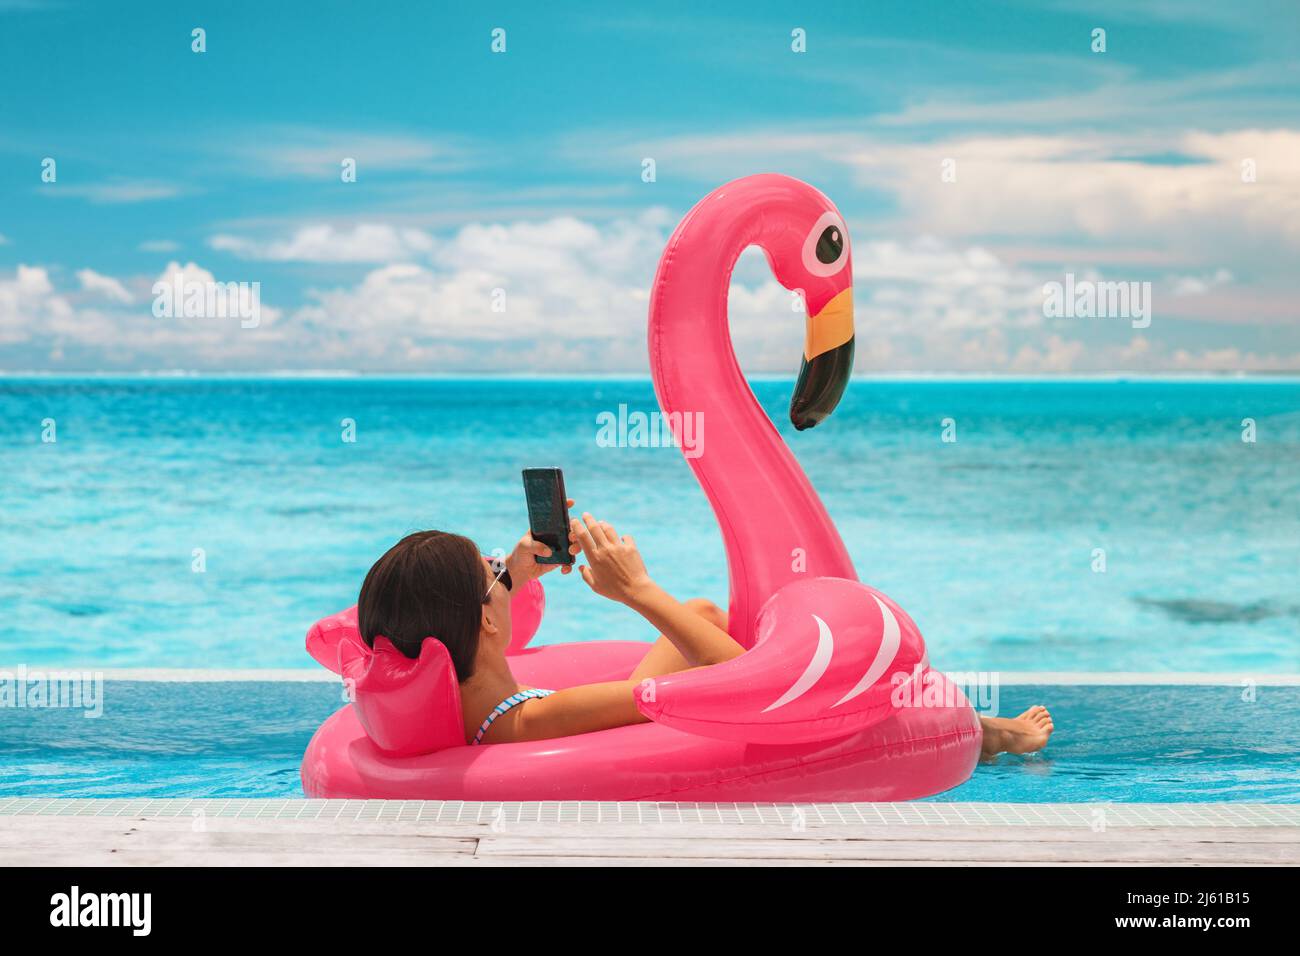 Summer swimming pool vacation relaxing woman floating in flamingo inflatable float using mobile phone at luxury resort sunbathing. Caribbean travel Stock Photo